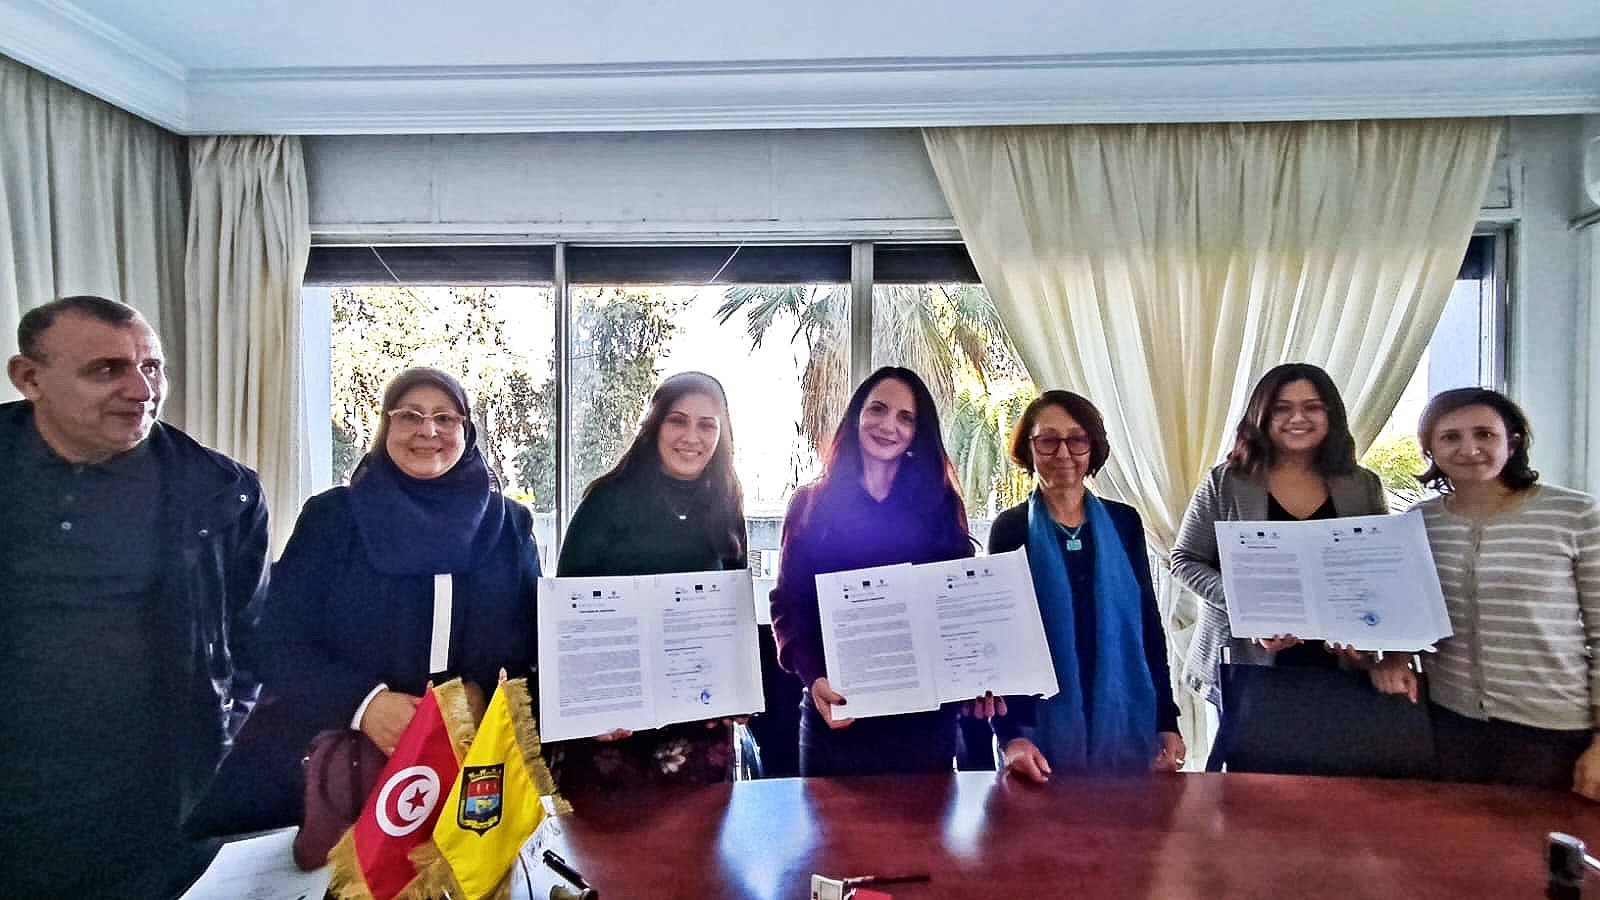 SEACAP4SDG signs a collaboration agreement with the municipality of Bizerte and Tunisian experts moving towards Sustainable Cities